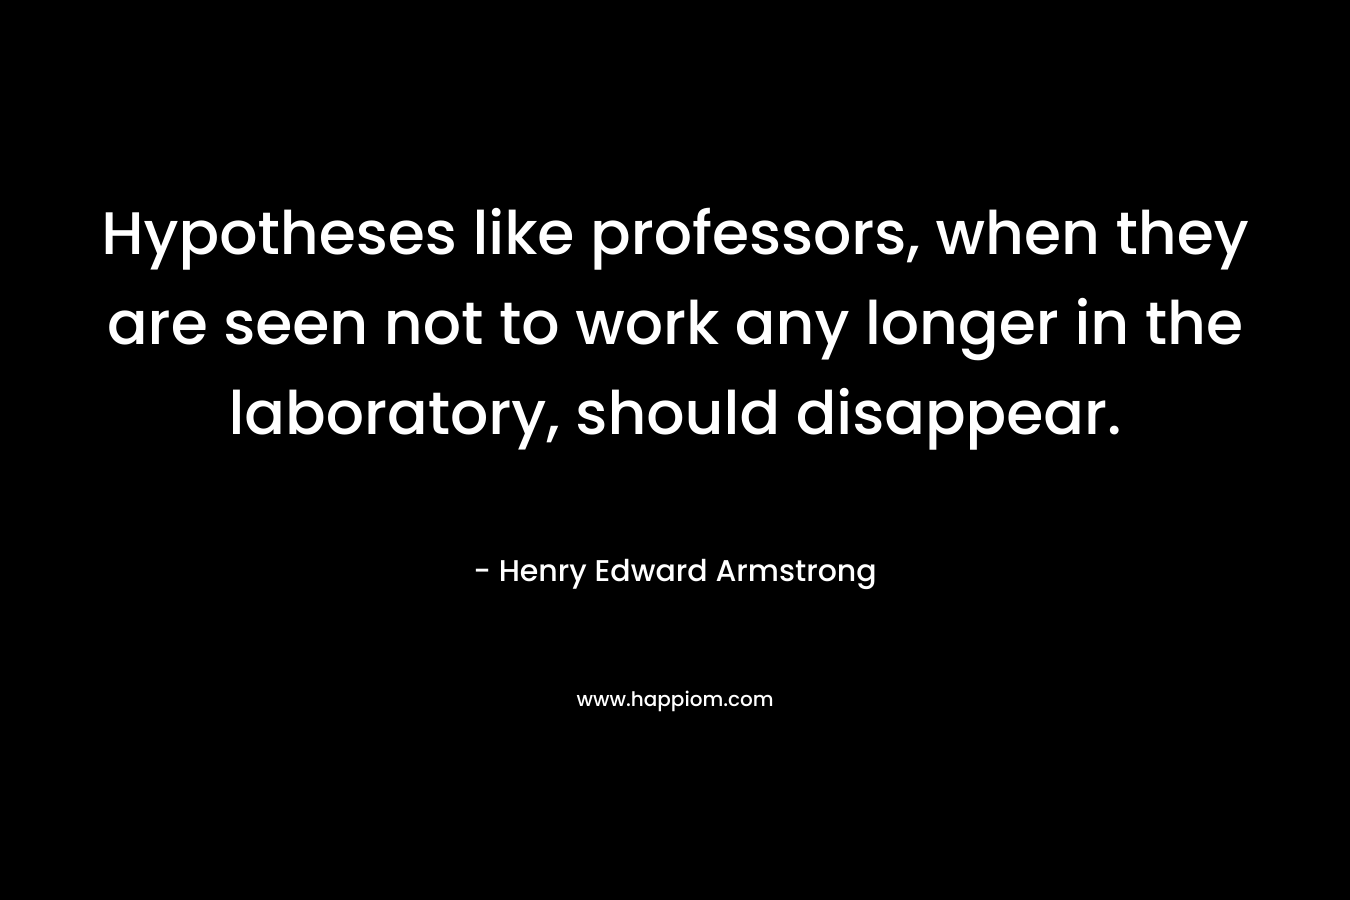 Hypotheses like professors, when they are seen not to work any longer in the laboratory, should disappear.